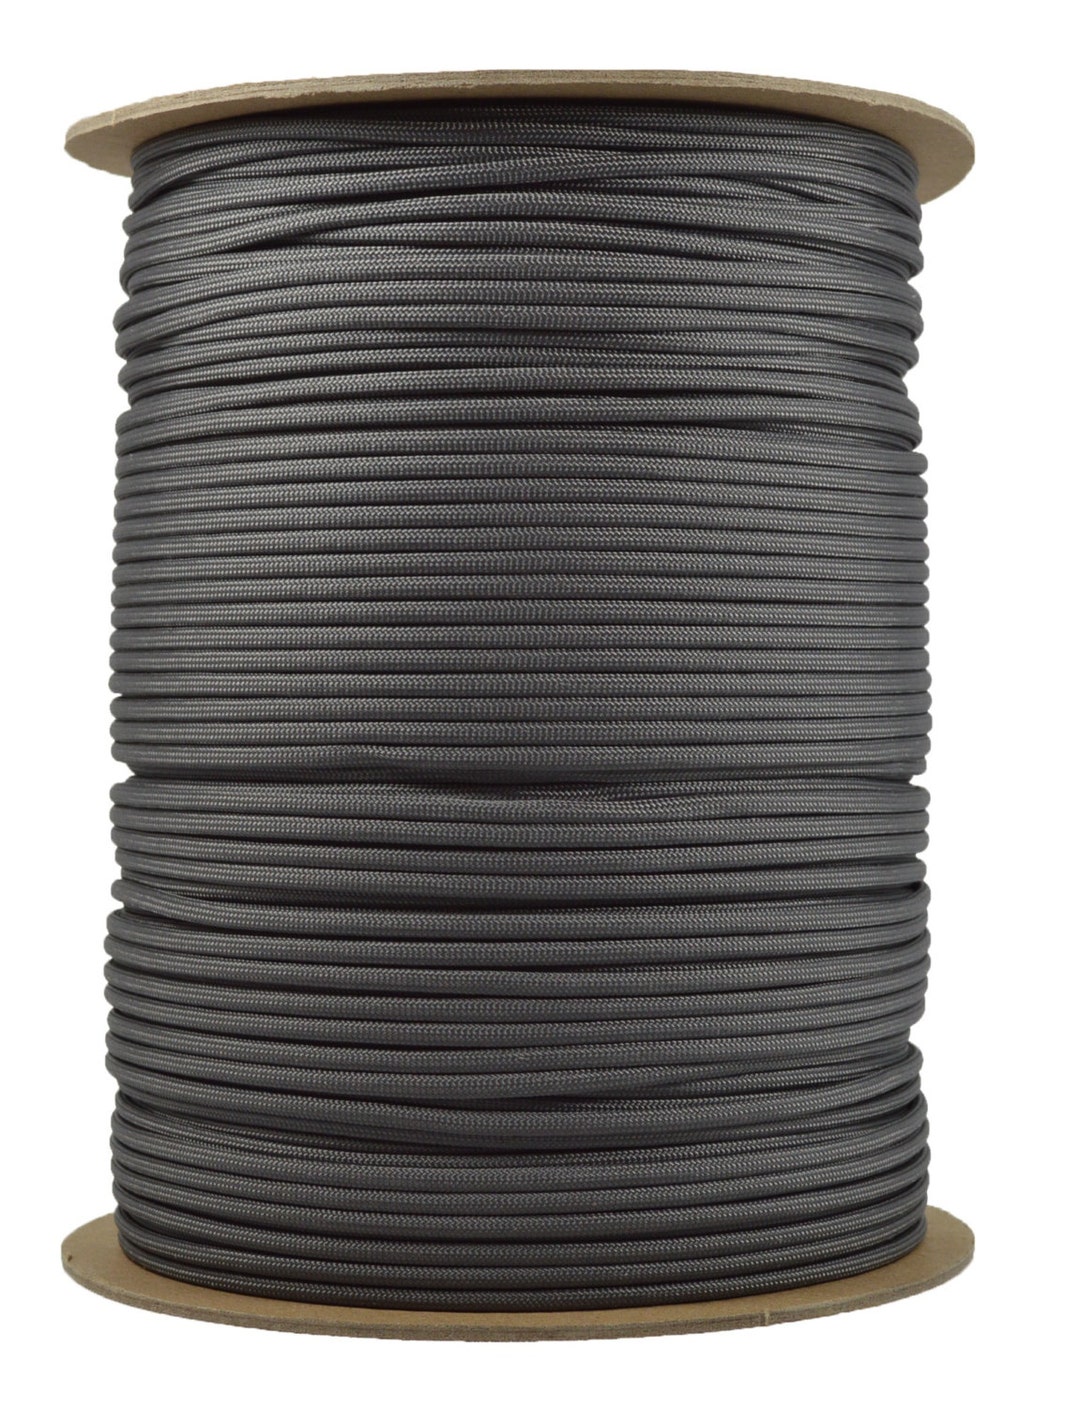 Charcoal 1000 Foot Spool 550 Paracord for Paracord Crafts Made in the ...